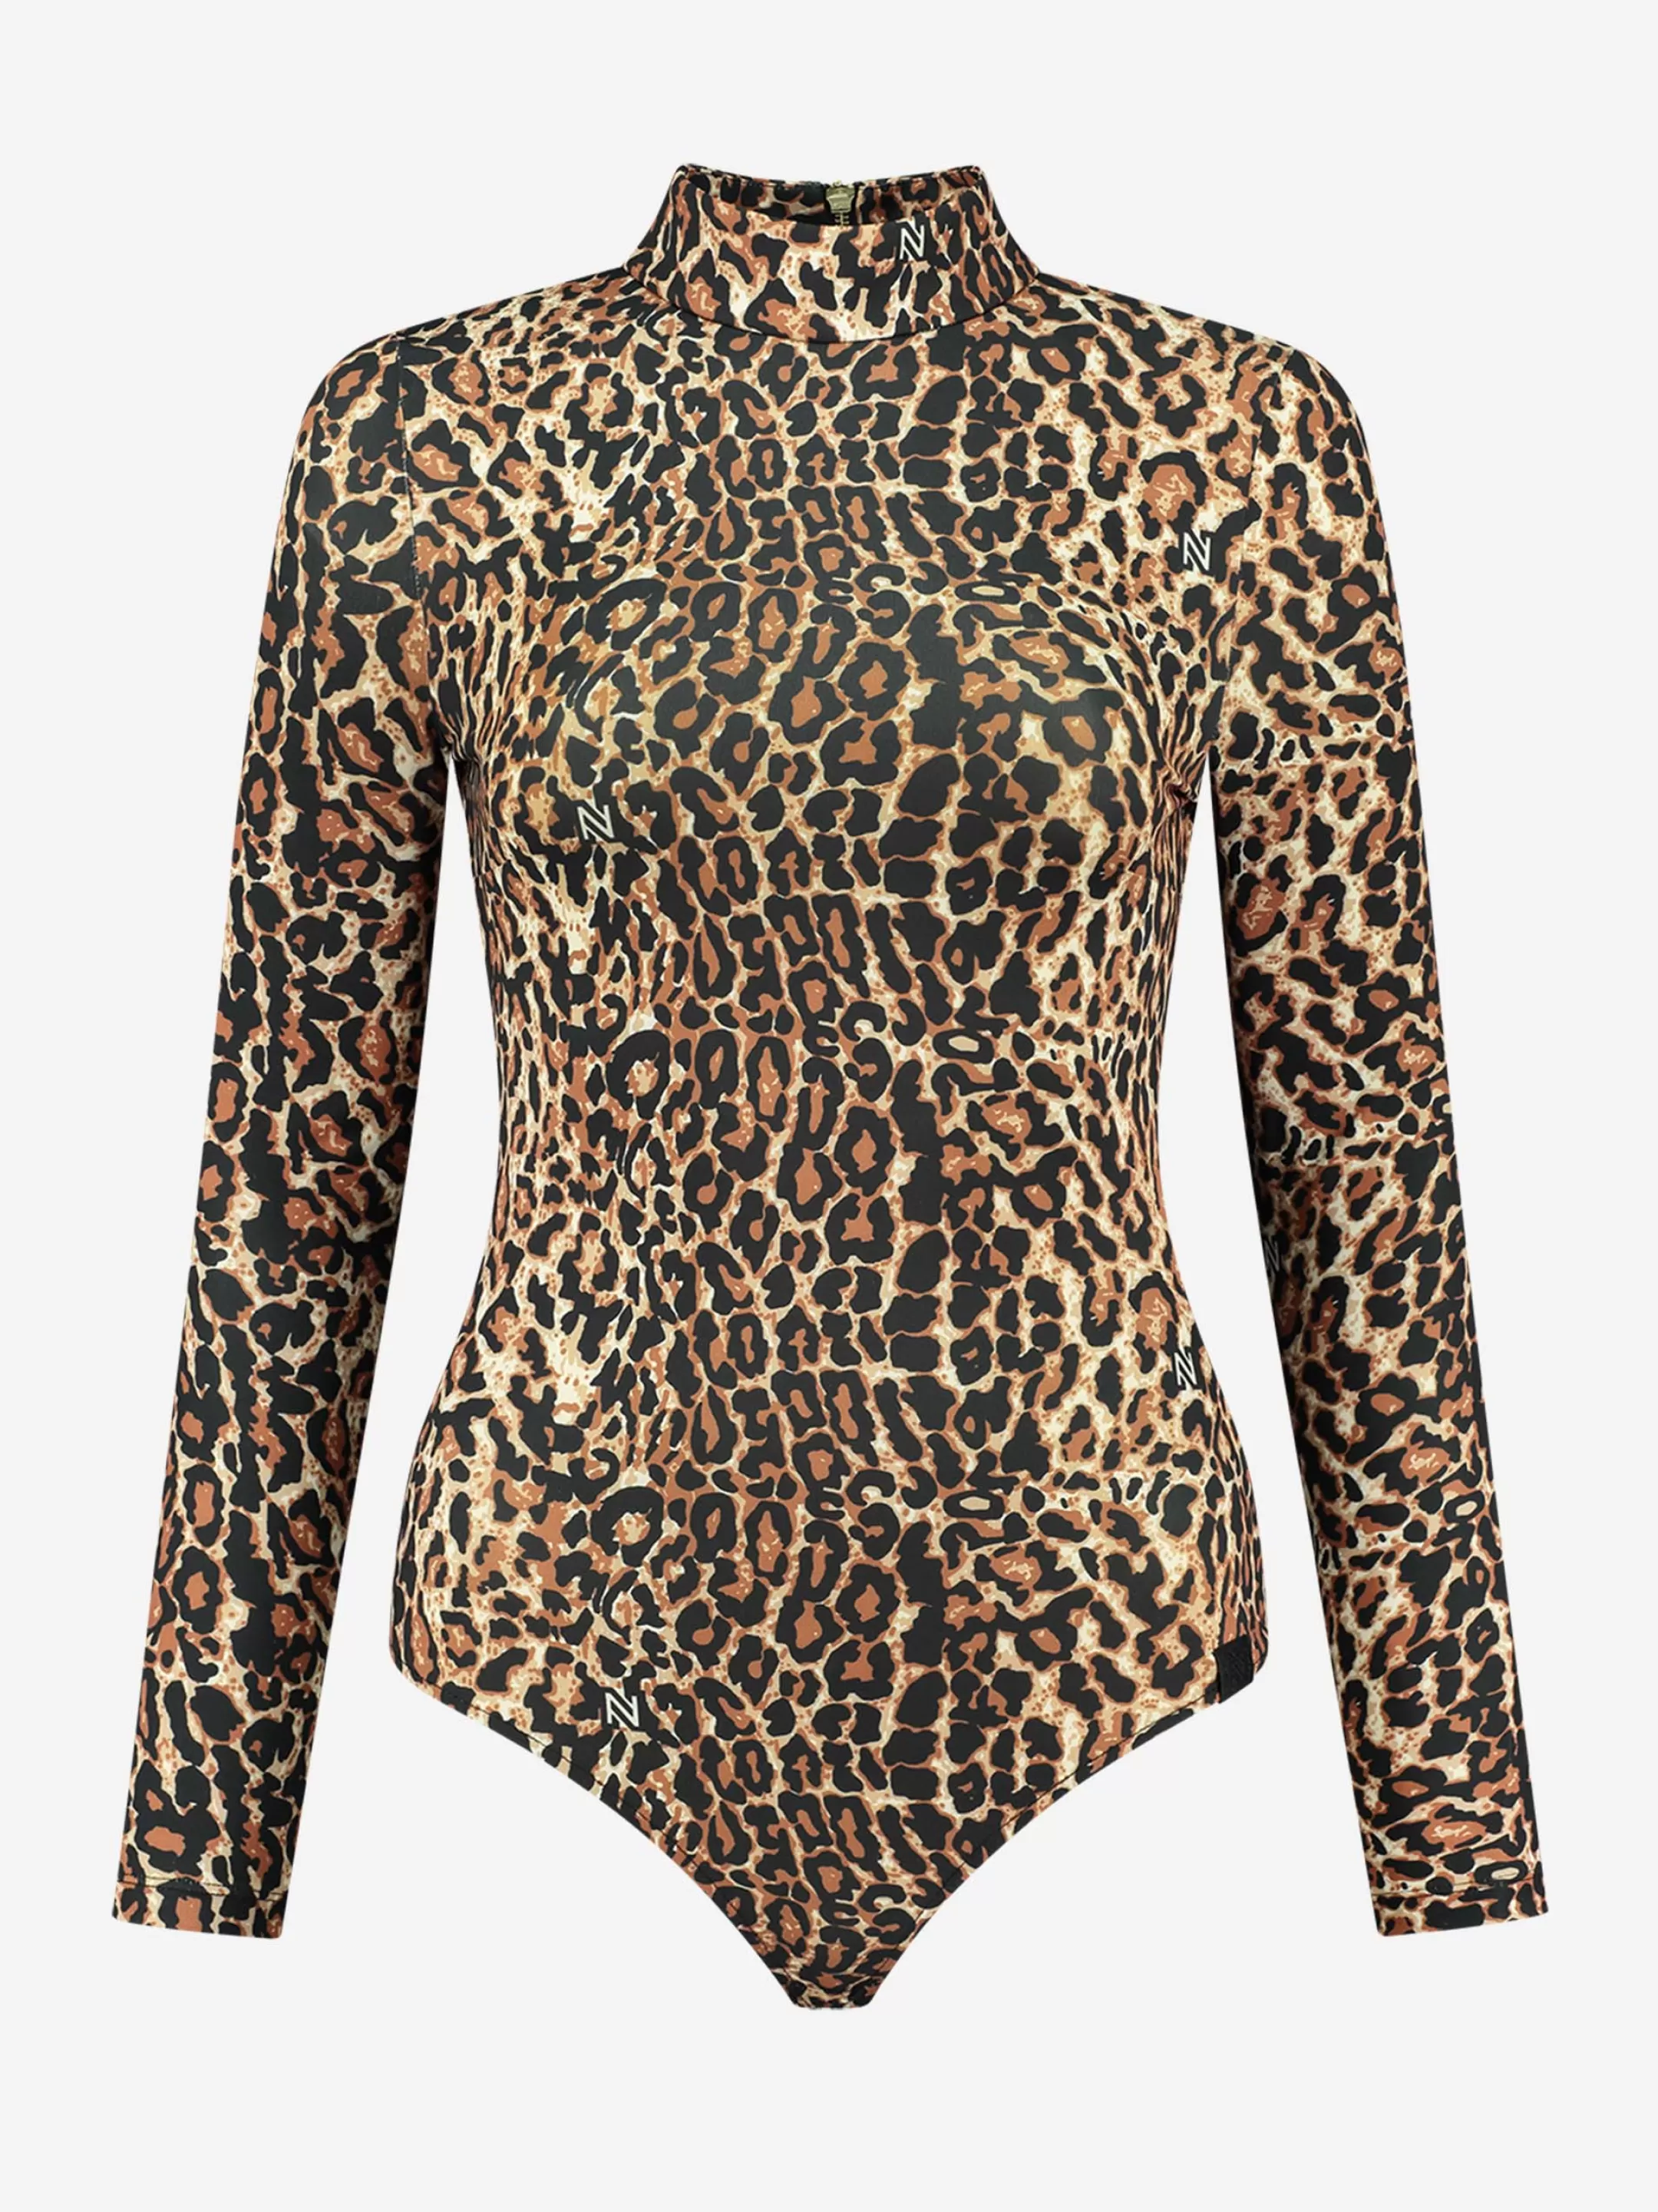 Best Fitted body met luipaardprint Tops | Selected by Kate Moss